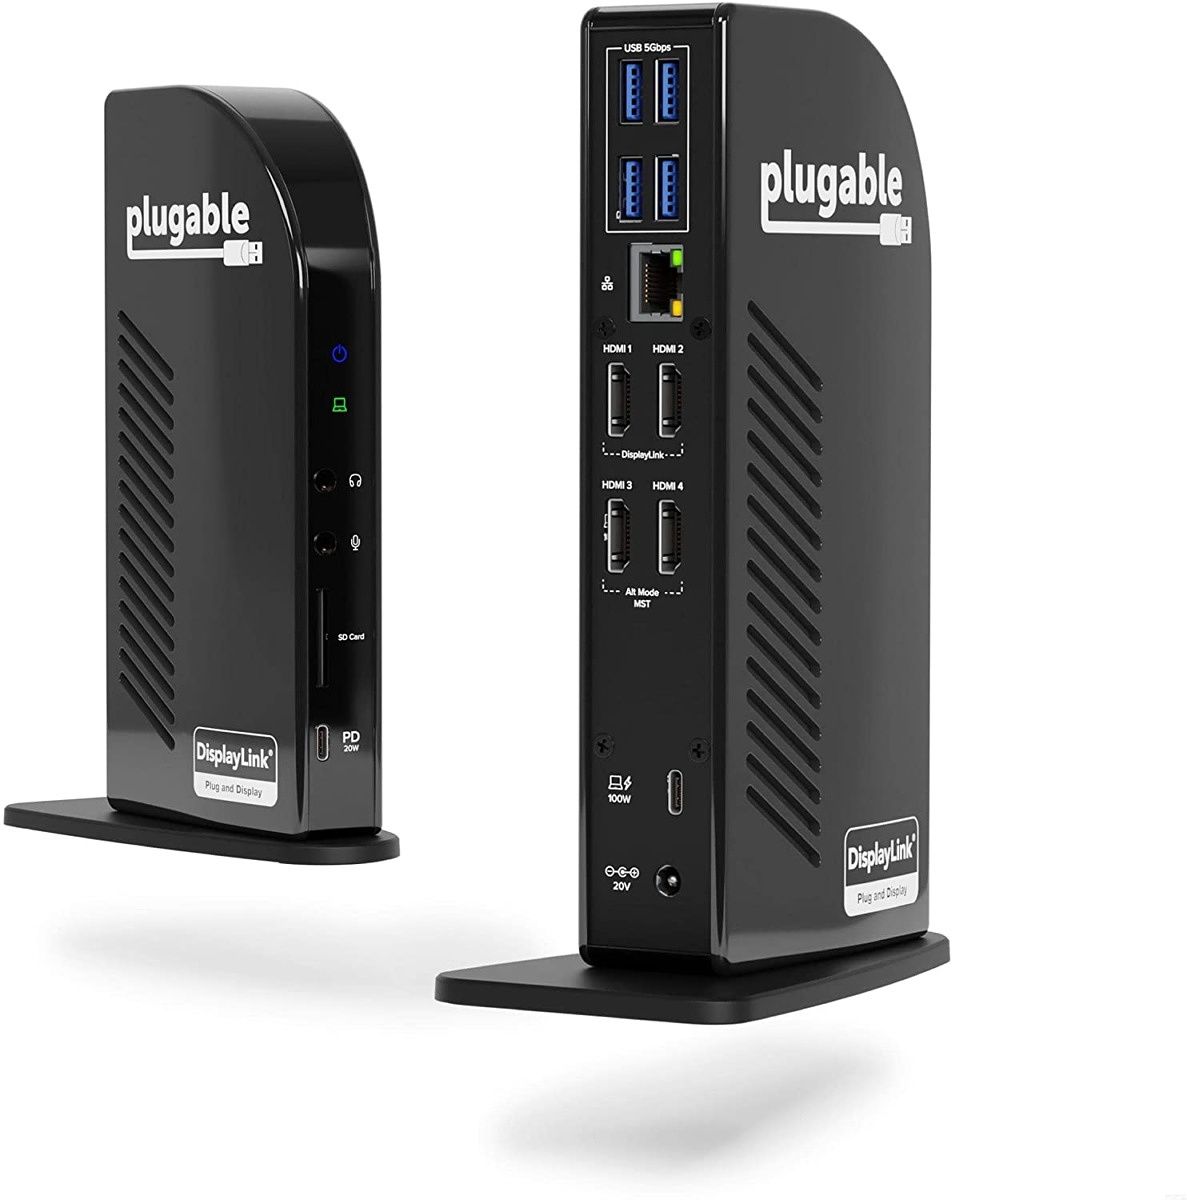 The Plugable UD-3900C4 is a docking station that can connect up to four Full HD monitors, plus other peripherals to your laptop.